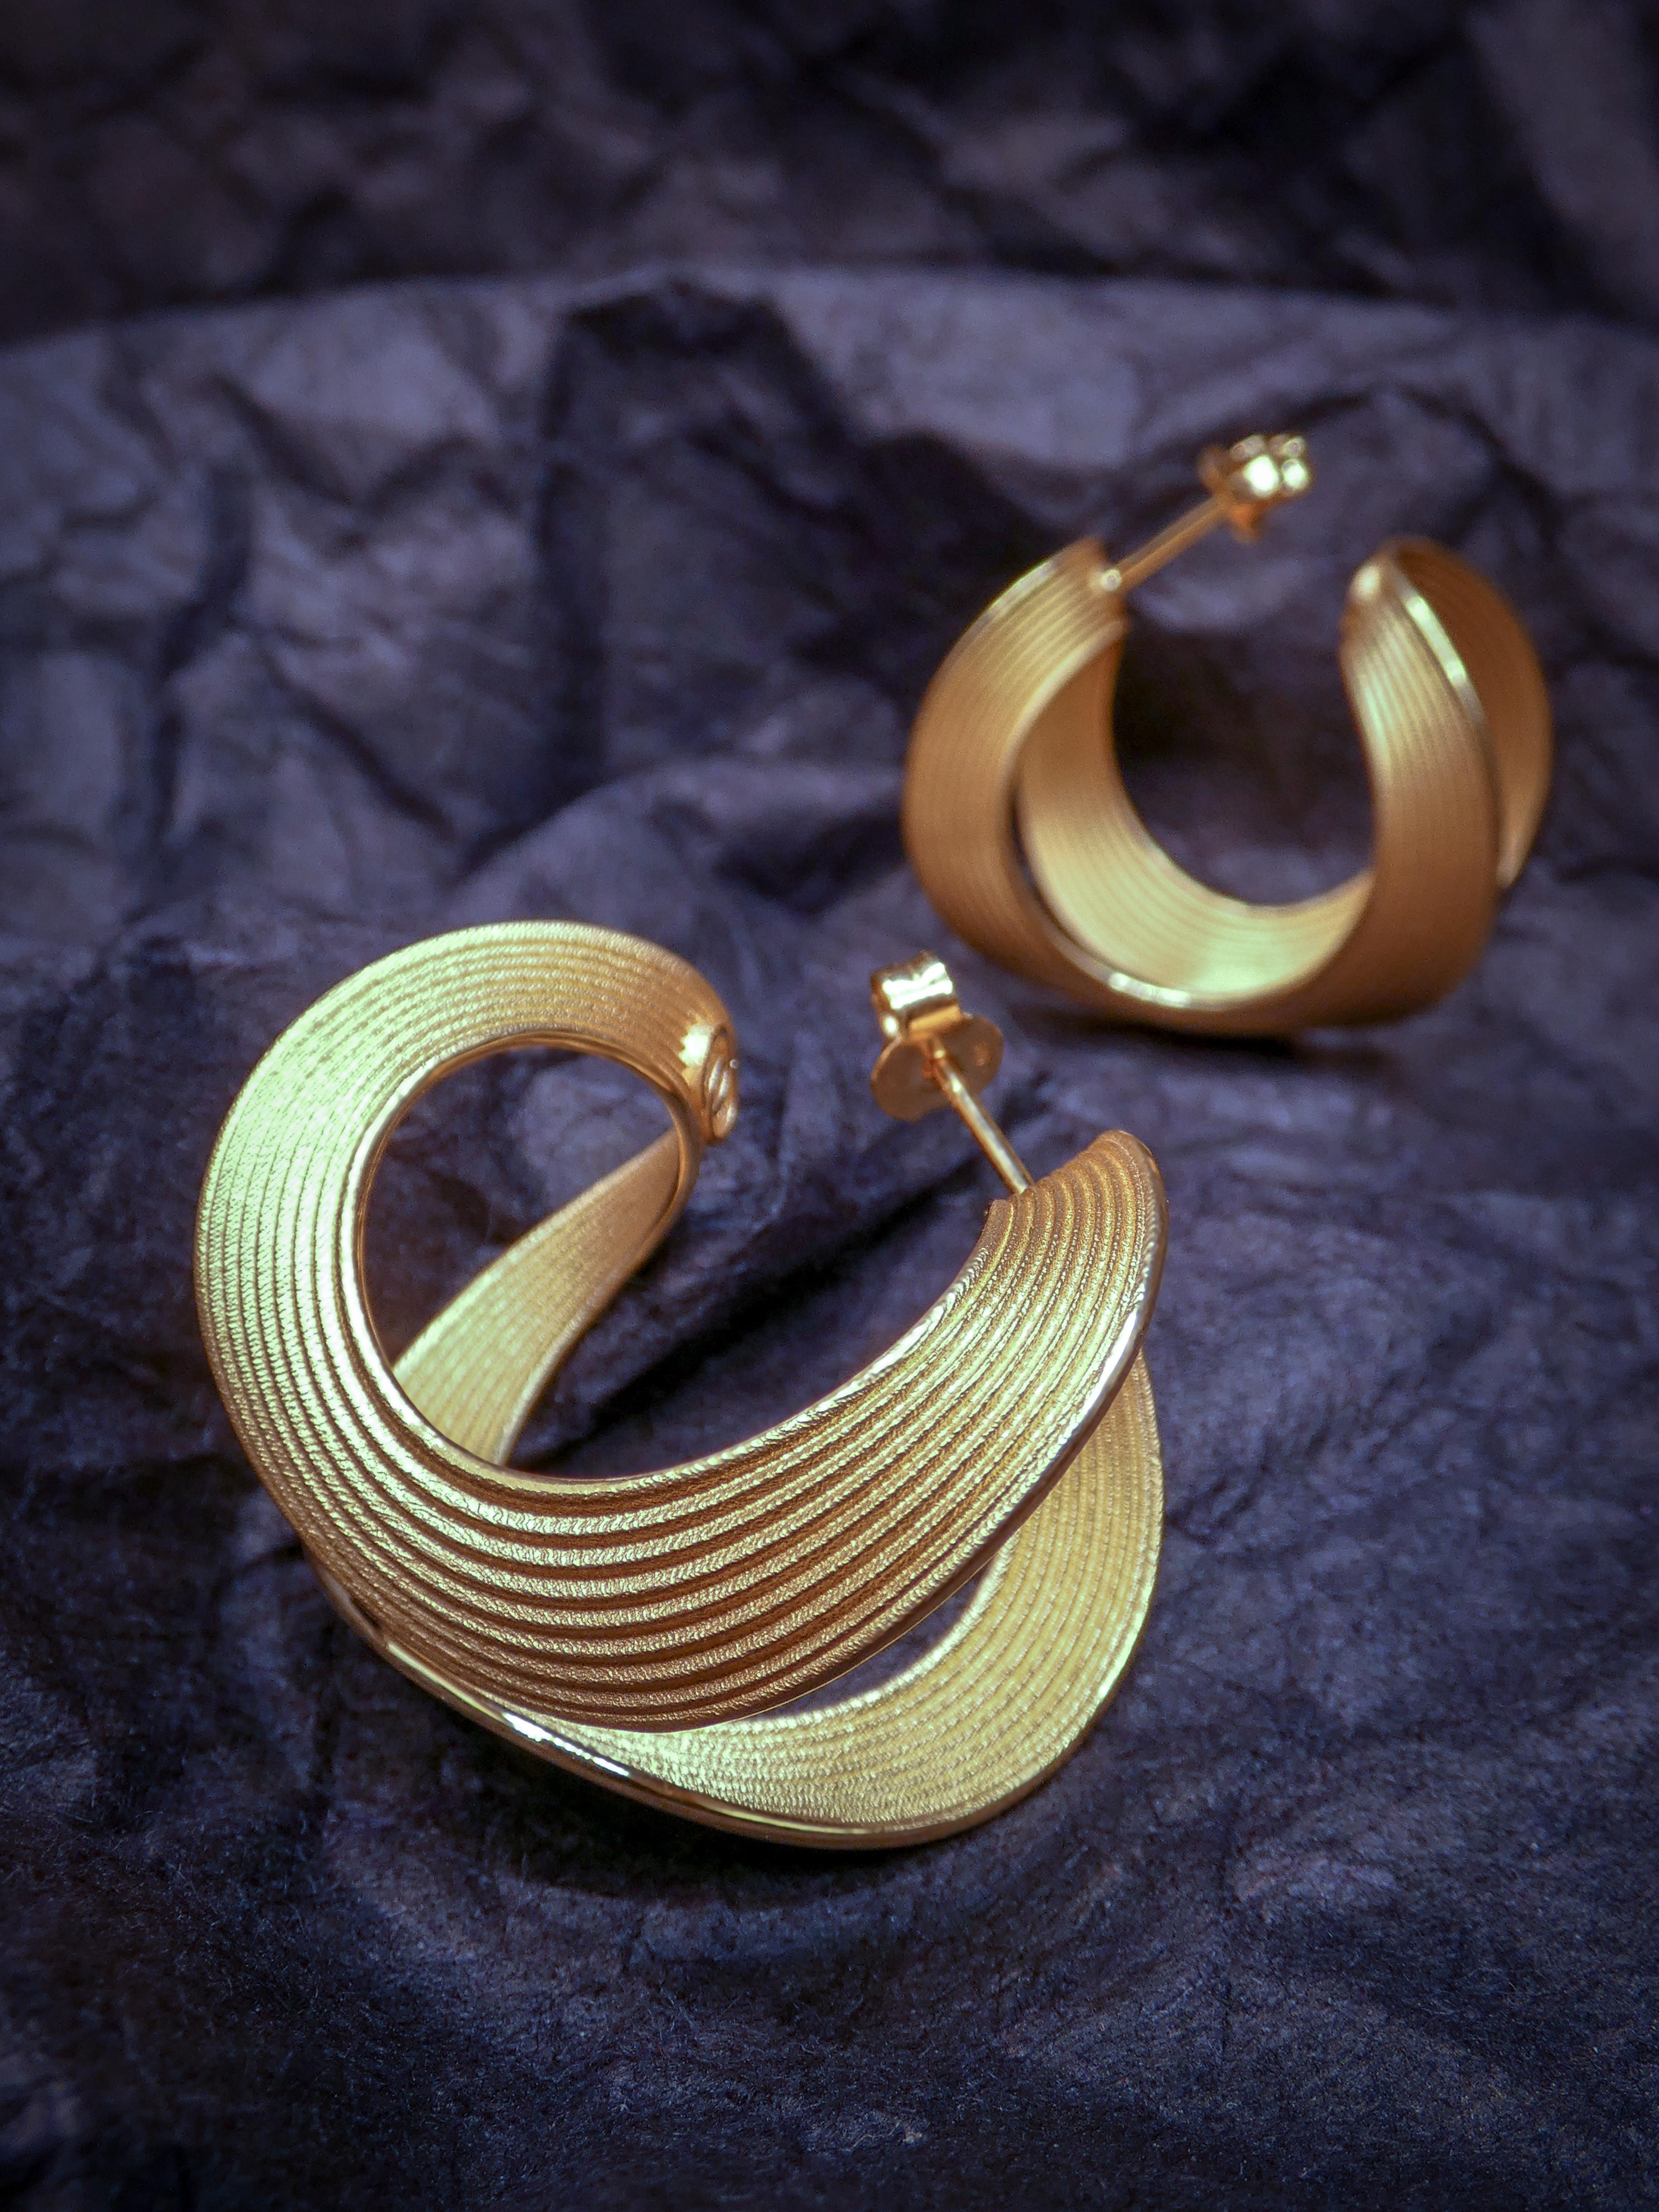 30 mm diameter beautiful ribbon hoop earrings crafted in polished and raw solid gold 18k.
Available in yellow gold, rose gold and white gold, 18k or 14k on request.
The approximate total weight is 15 grams in 18k 
The production time of this jewel